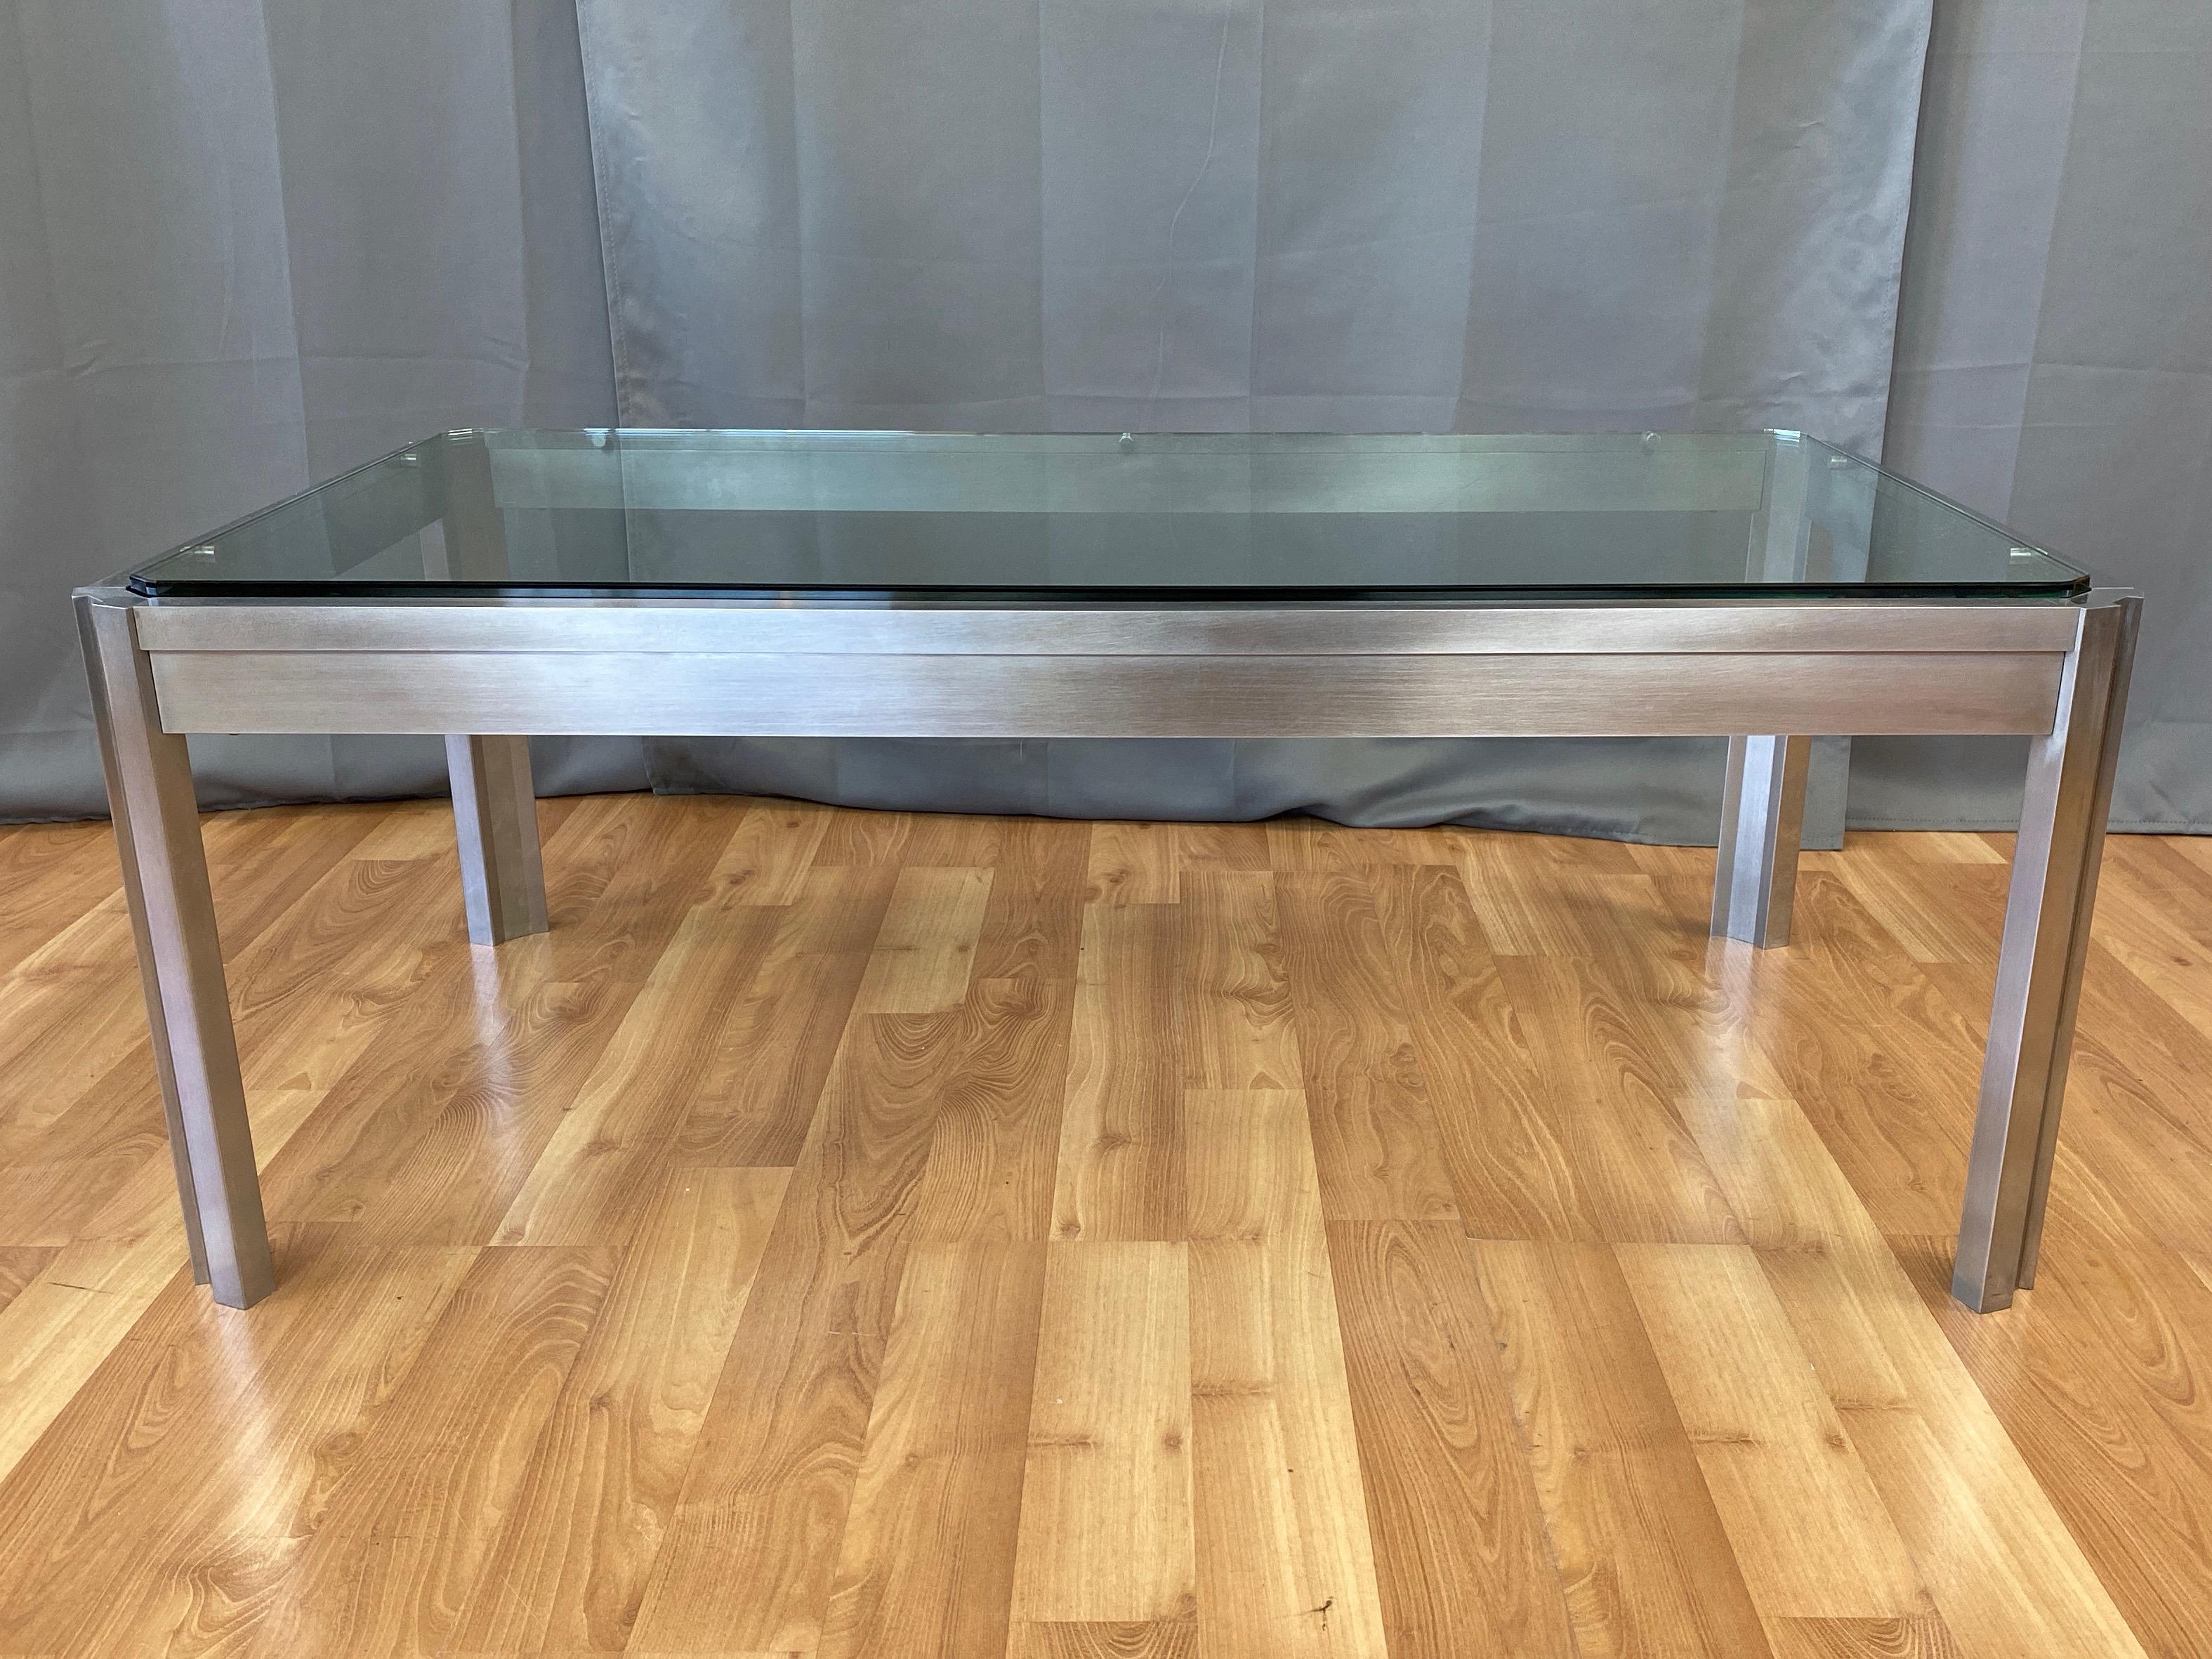 A substantial and unique 1970s brushed stainless steel and glass coffee table from the estate of Henri and Tomoye Takahashi.

Large and heavy custom fabricated frame of exactingly machined and assembled solid stainless steel, with channeled legs and